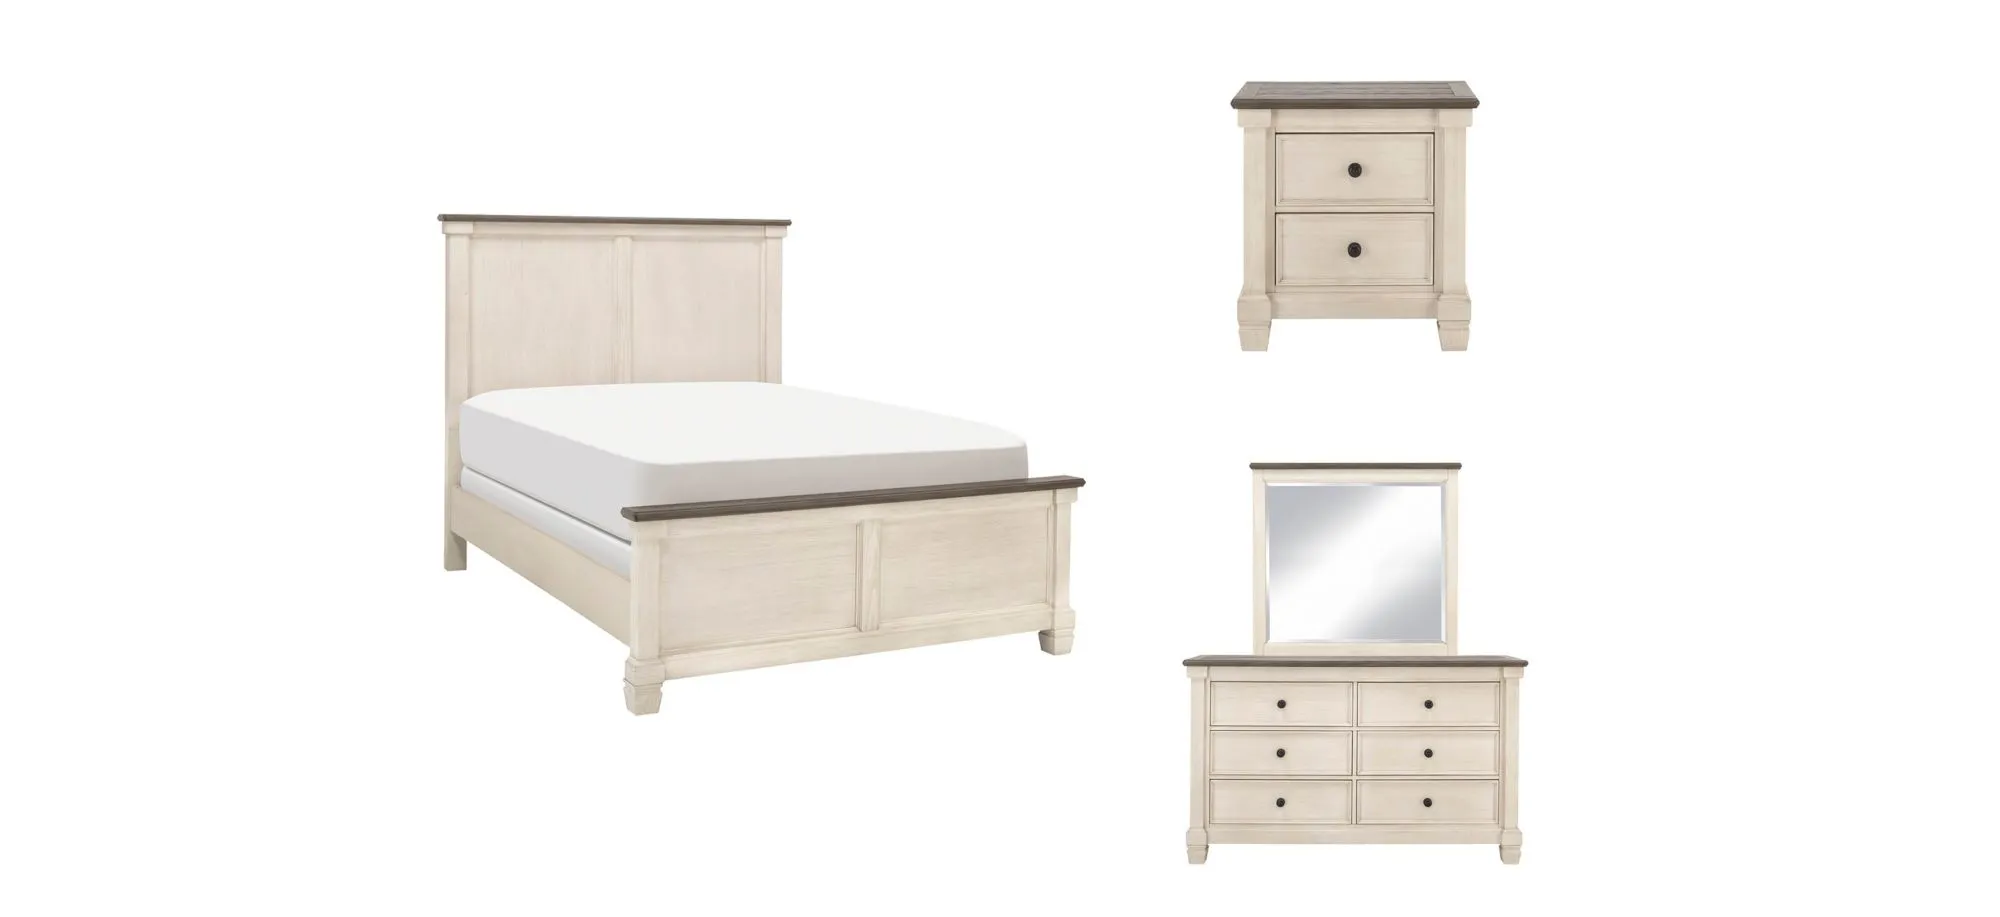 Andover 4-pc. Bedroom Set in Antique white/brown gray by Bellanest